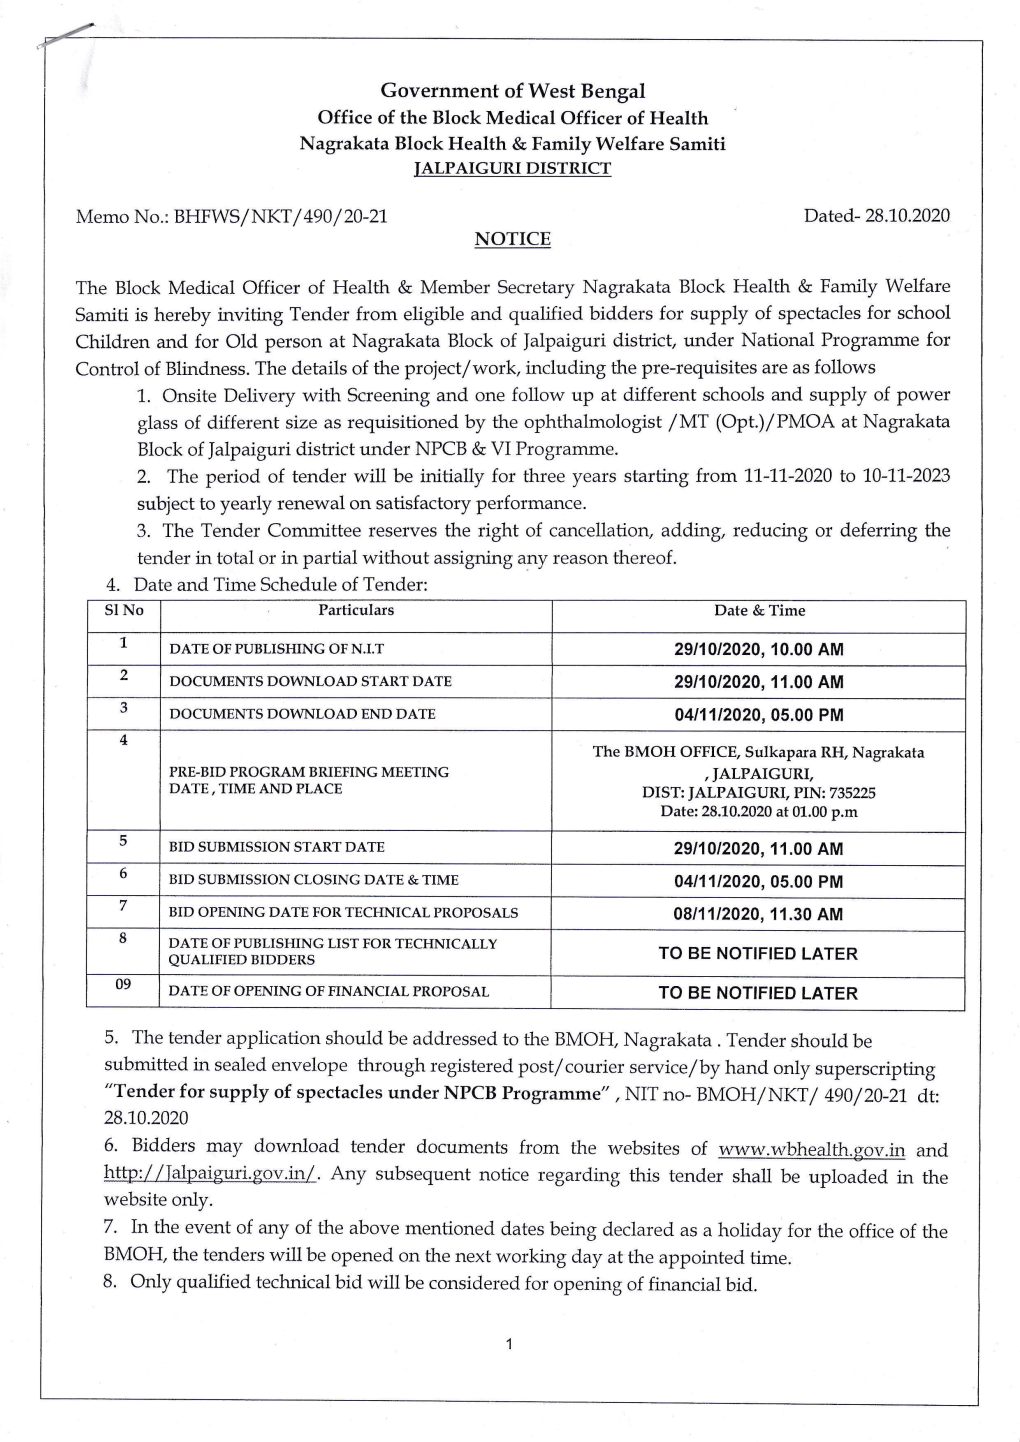 Government of West Bengal 6. Bidders May Download Tender